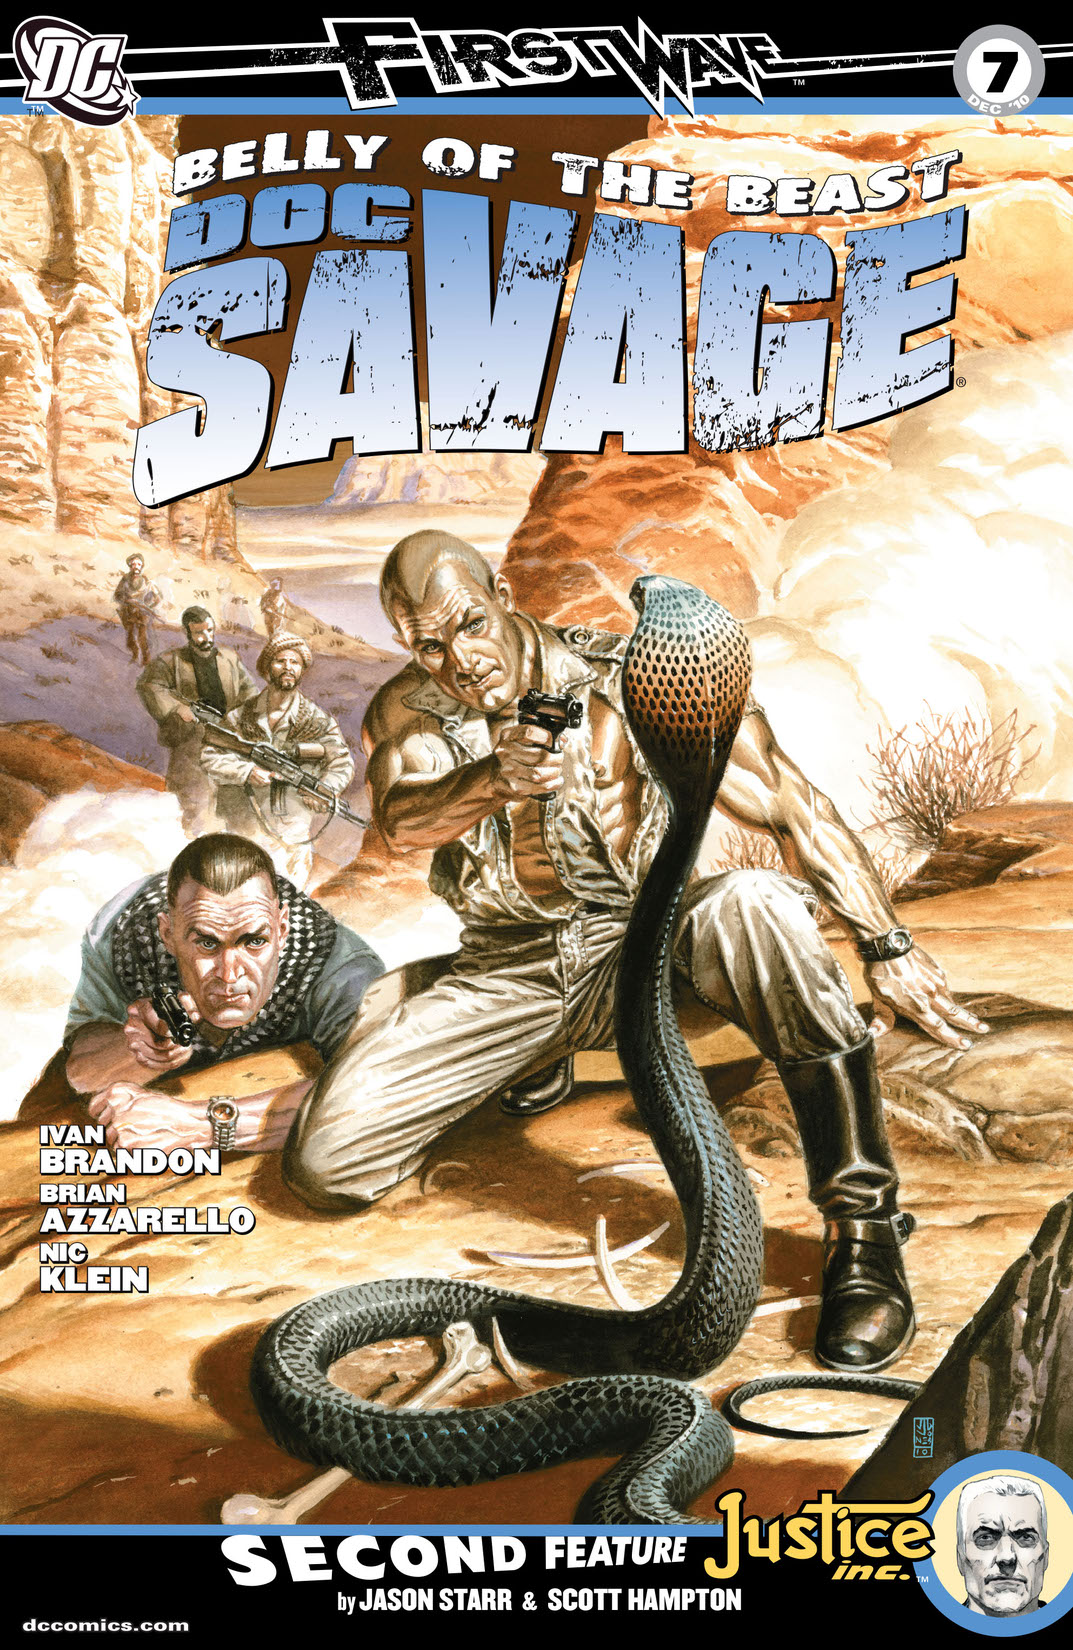 Doc Savage #7 preview images